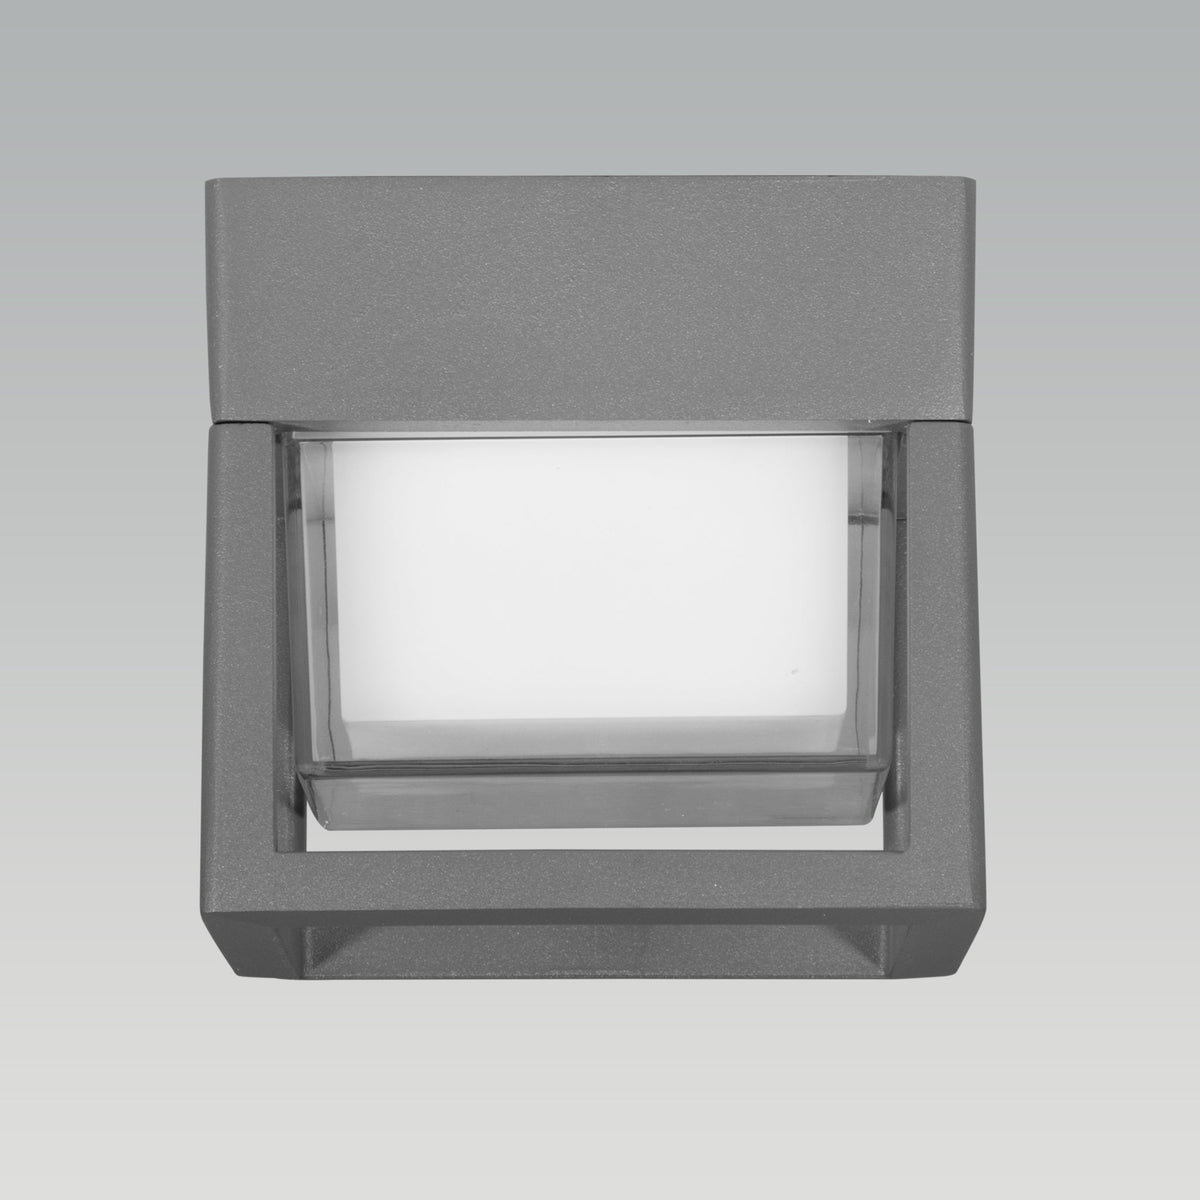 United Square Outdoor LED Ceiling Light online